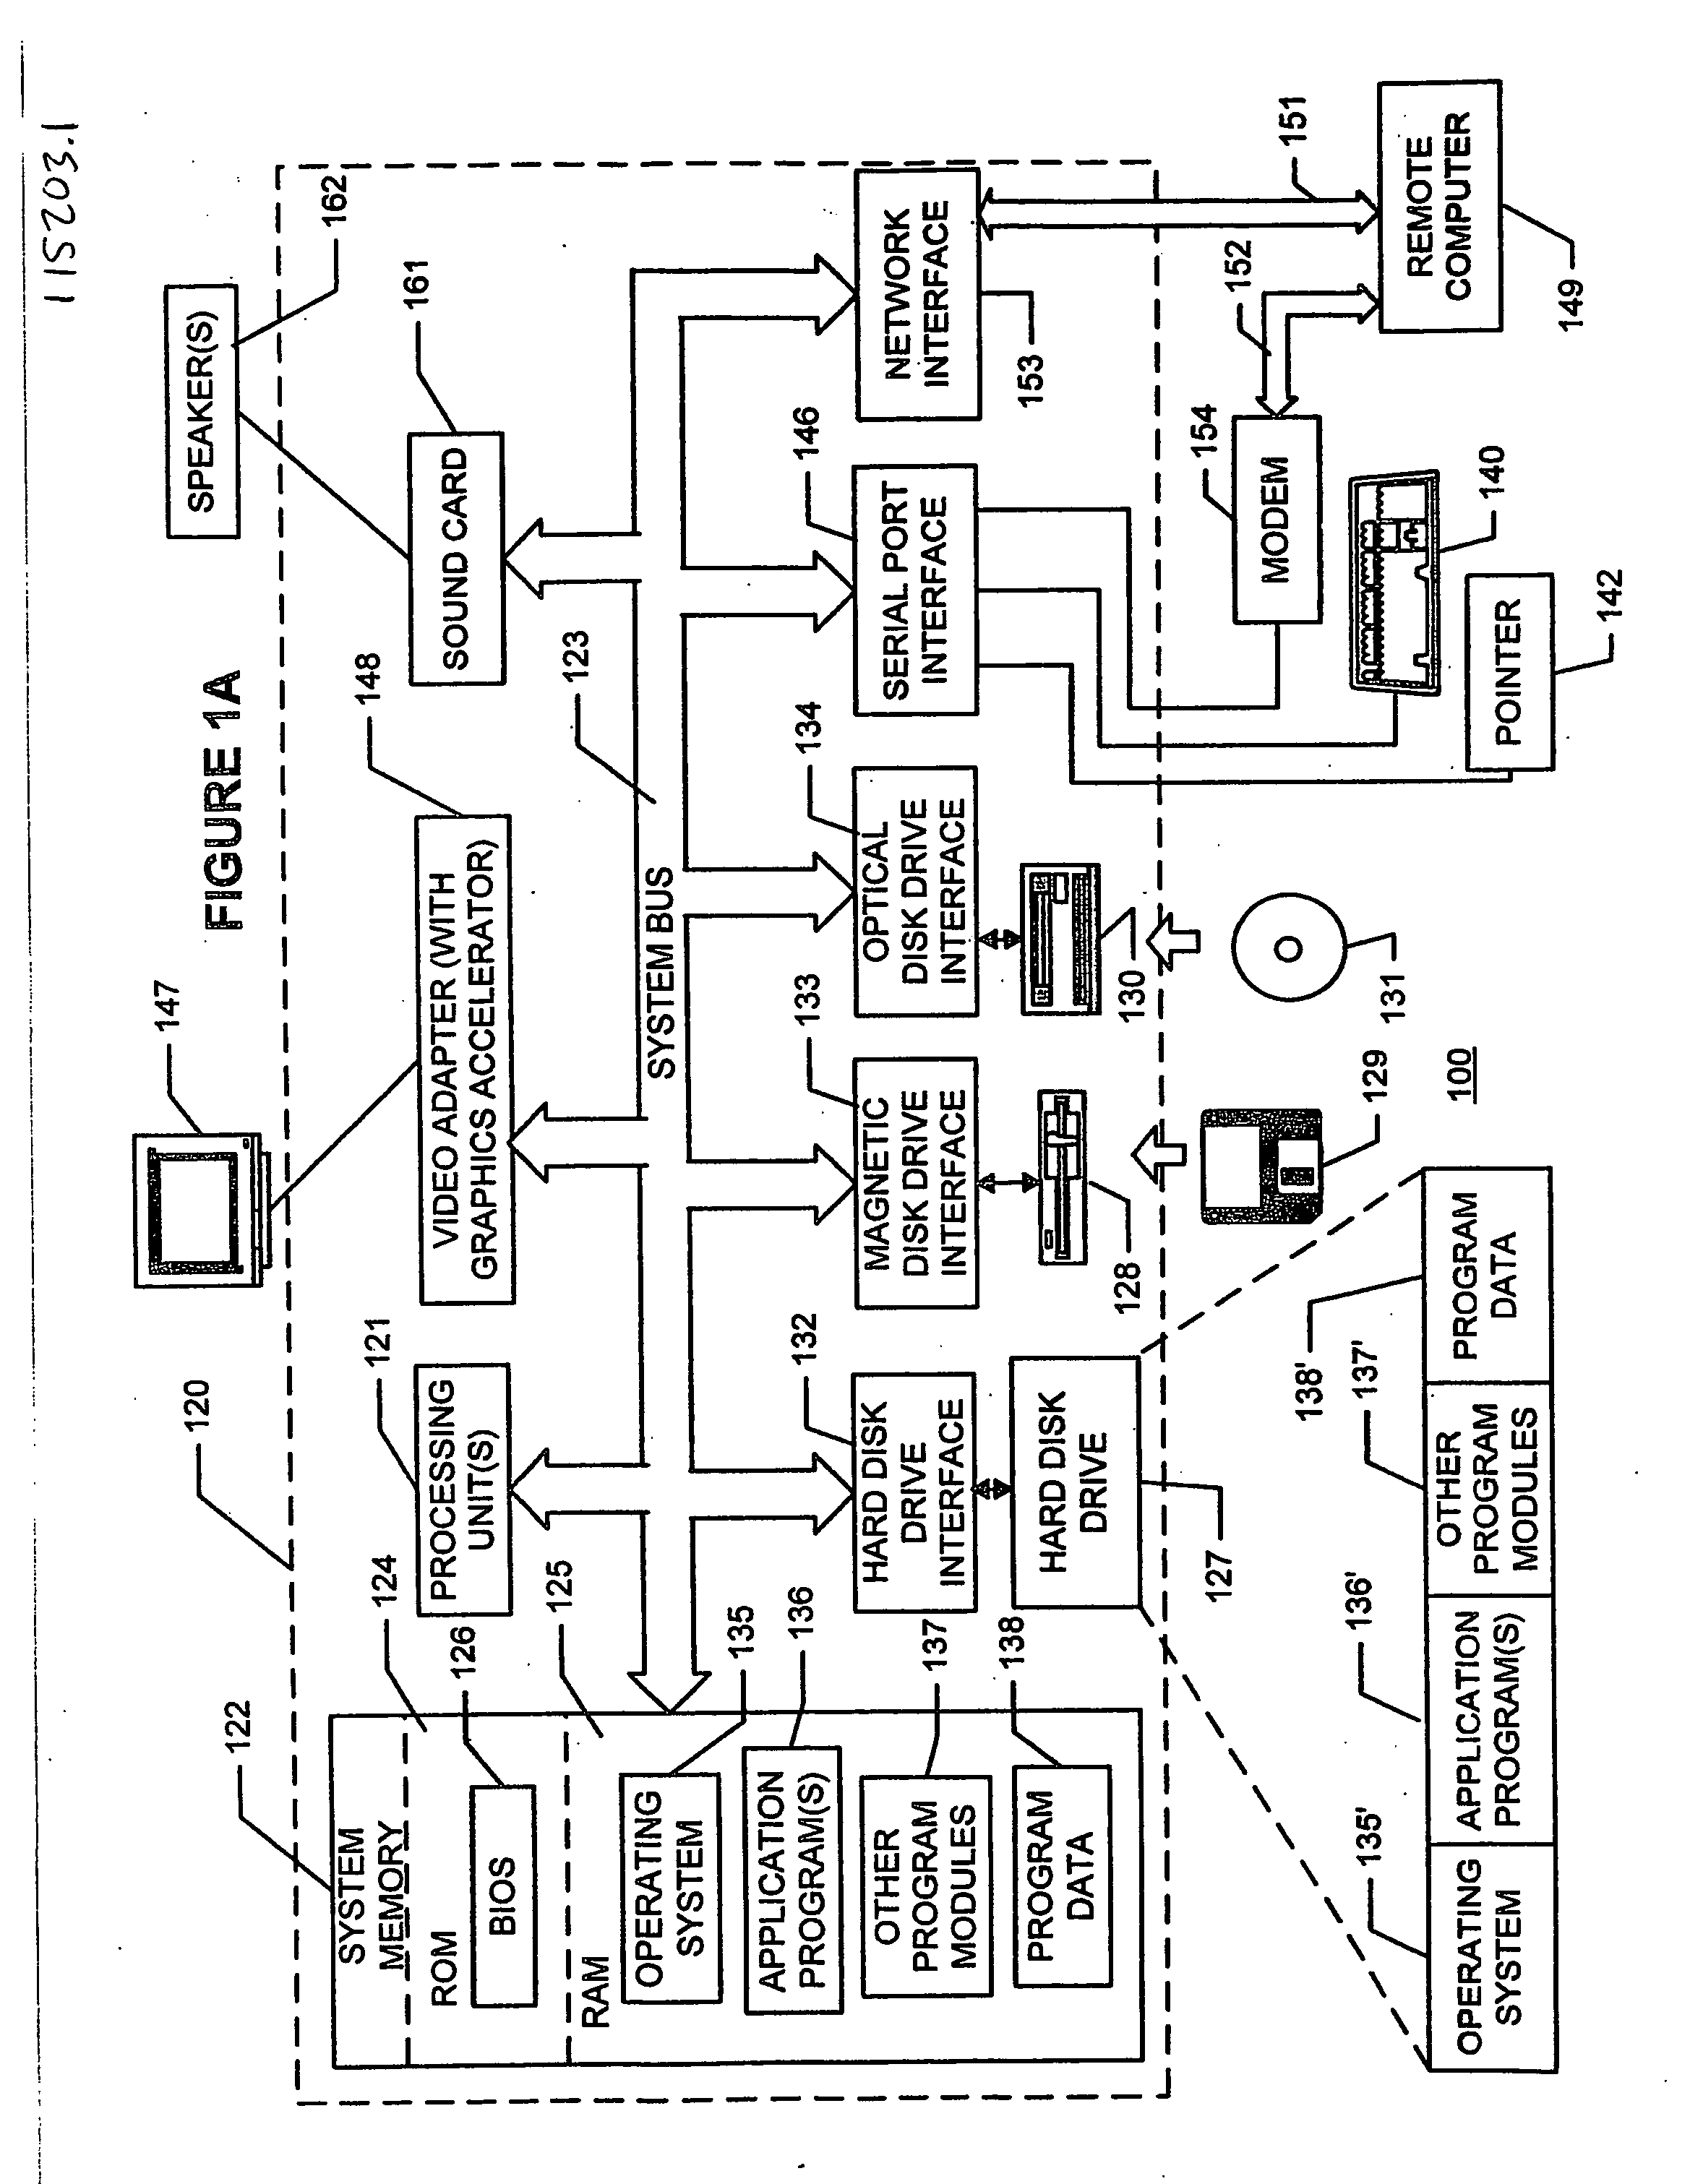 Methods, apparatus and data structures for providing a user interface which facilitates decision making